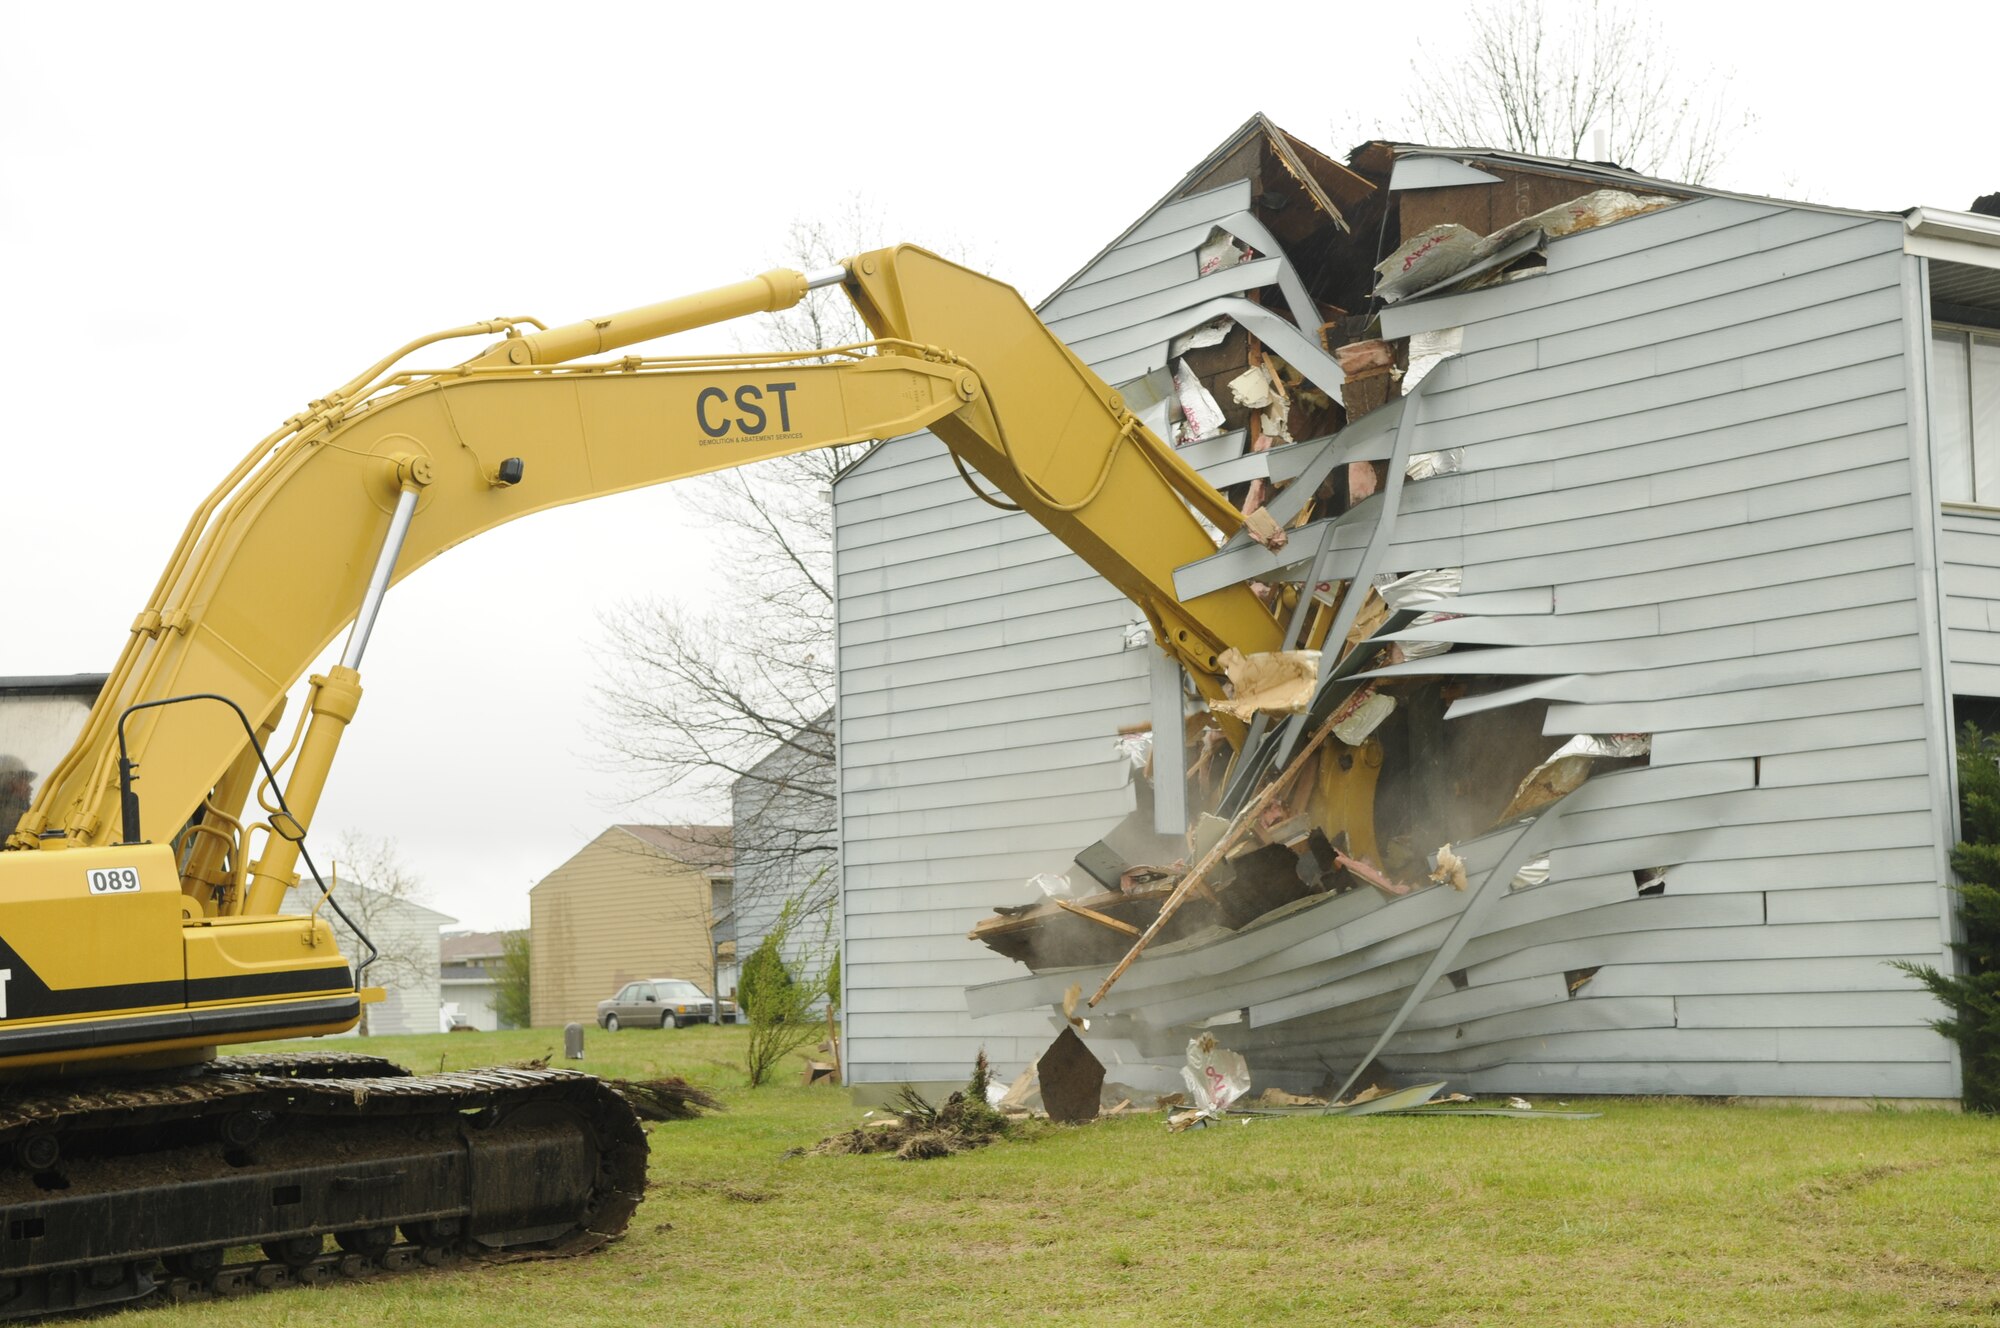 11th Wing Commander Col. Jon A. Roop, using an excavator, demolishes the side of the first home that was built in the old Rickenbacker South neighborhood April 3 at the BLB Privatized Housing groundbreaking ceremony. The ceremony was held to commence the demolition of old homes and the construction of new homes there. (U.S. Air Force photo by Staff Sgt. Raymond Mills)